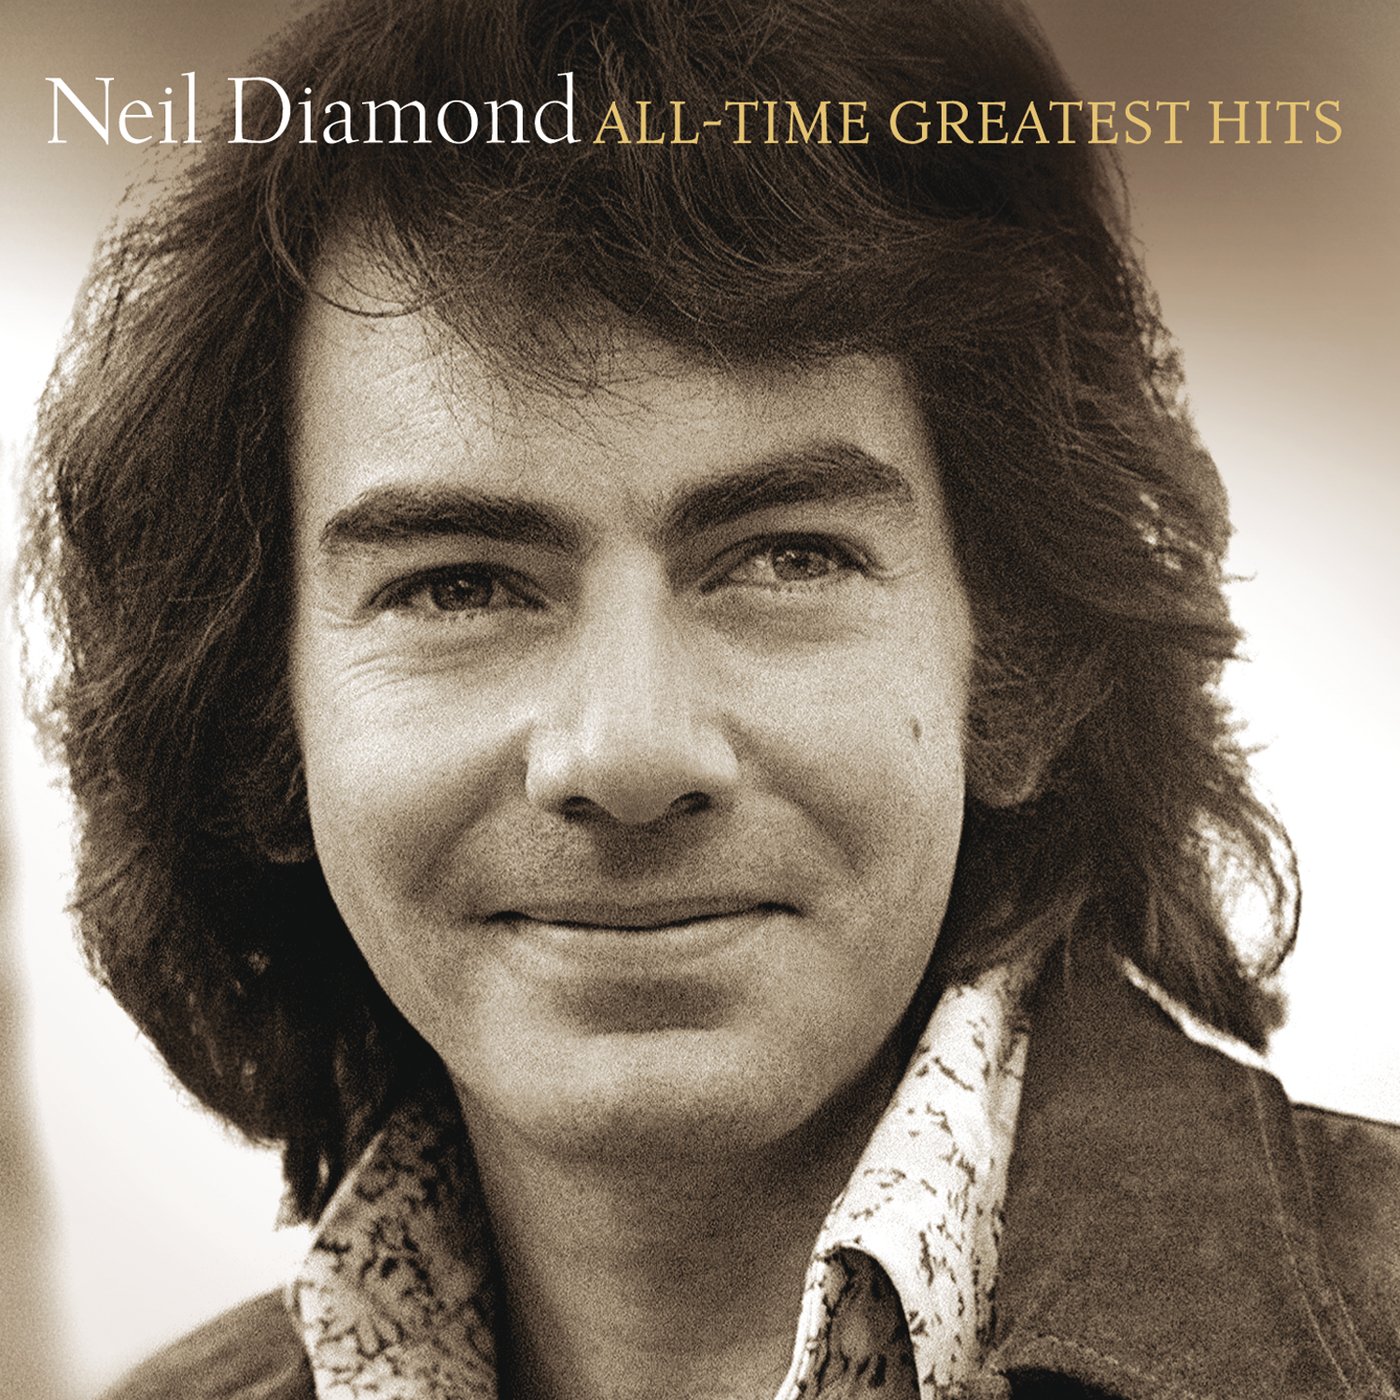 All-Time Greatest Hits (2-CD Deluxe Edition)